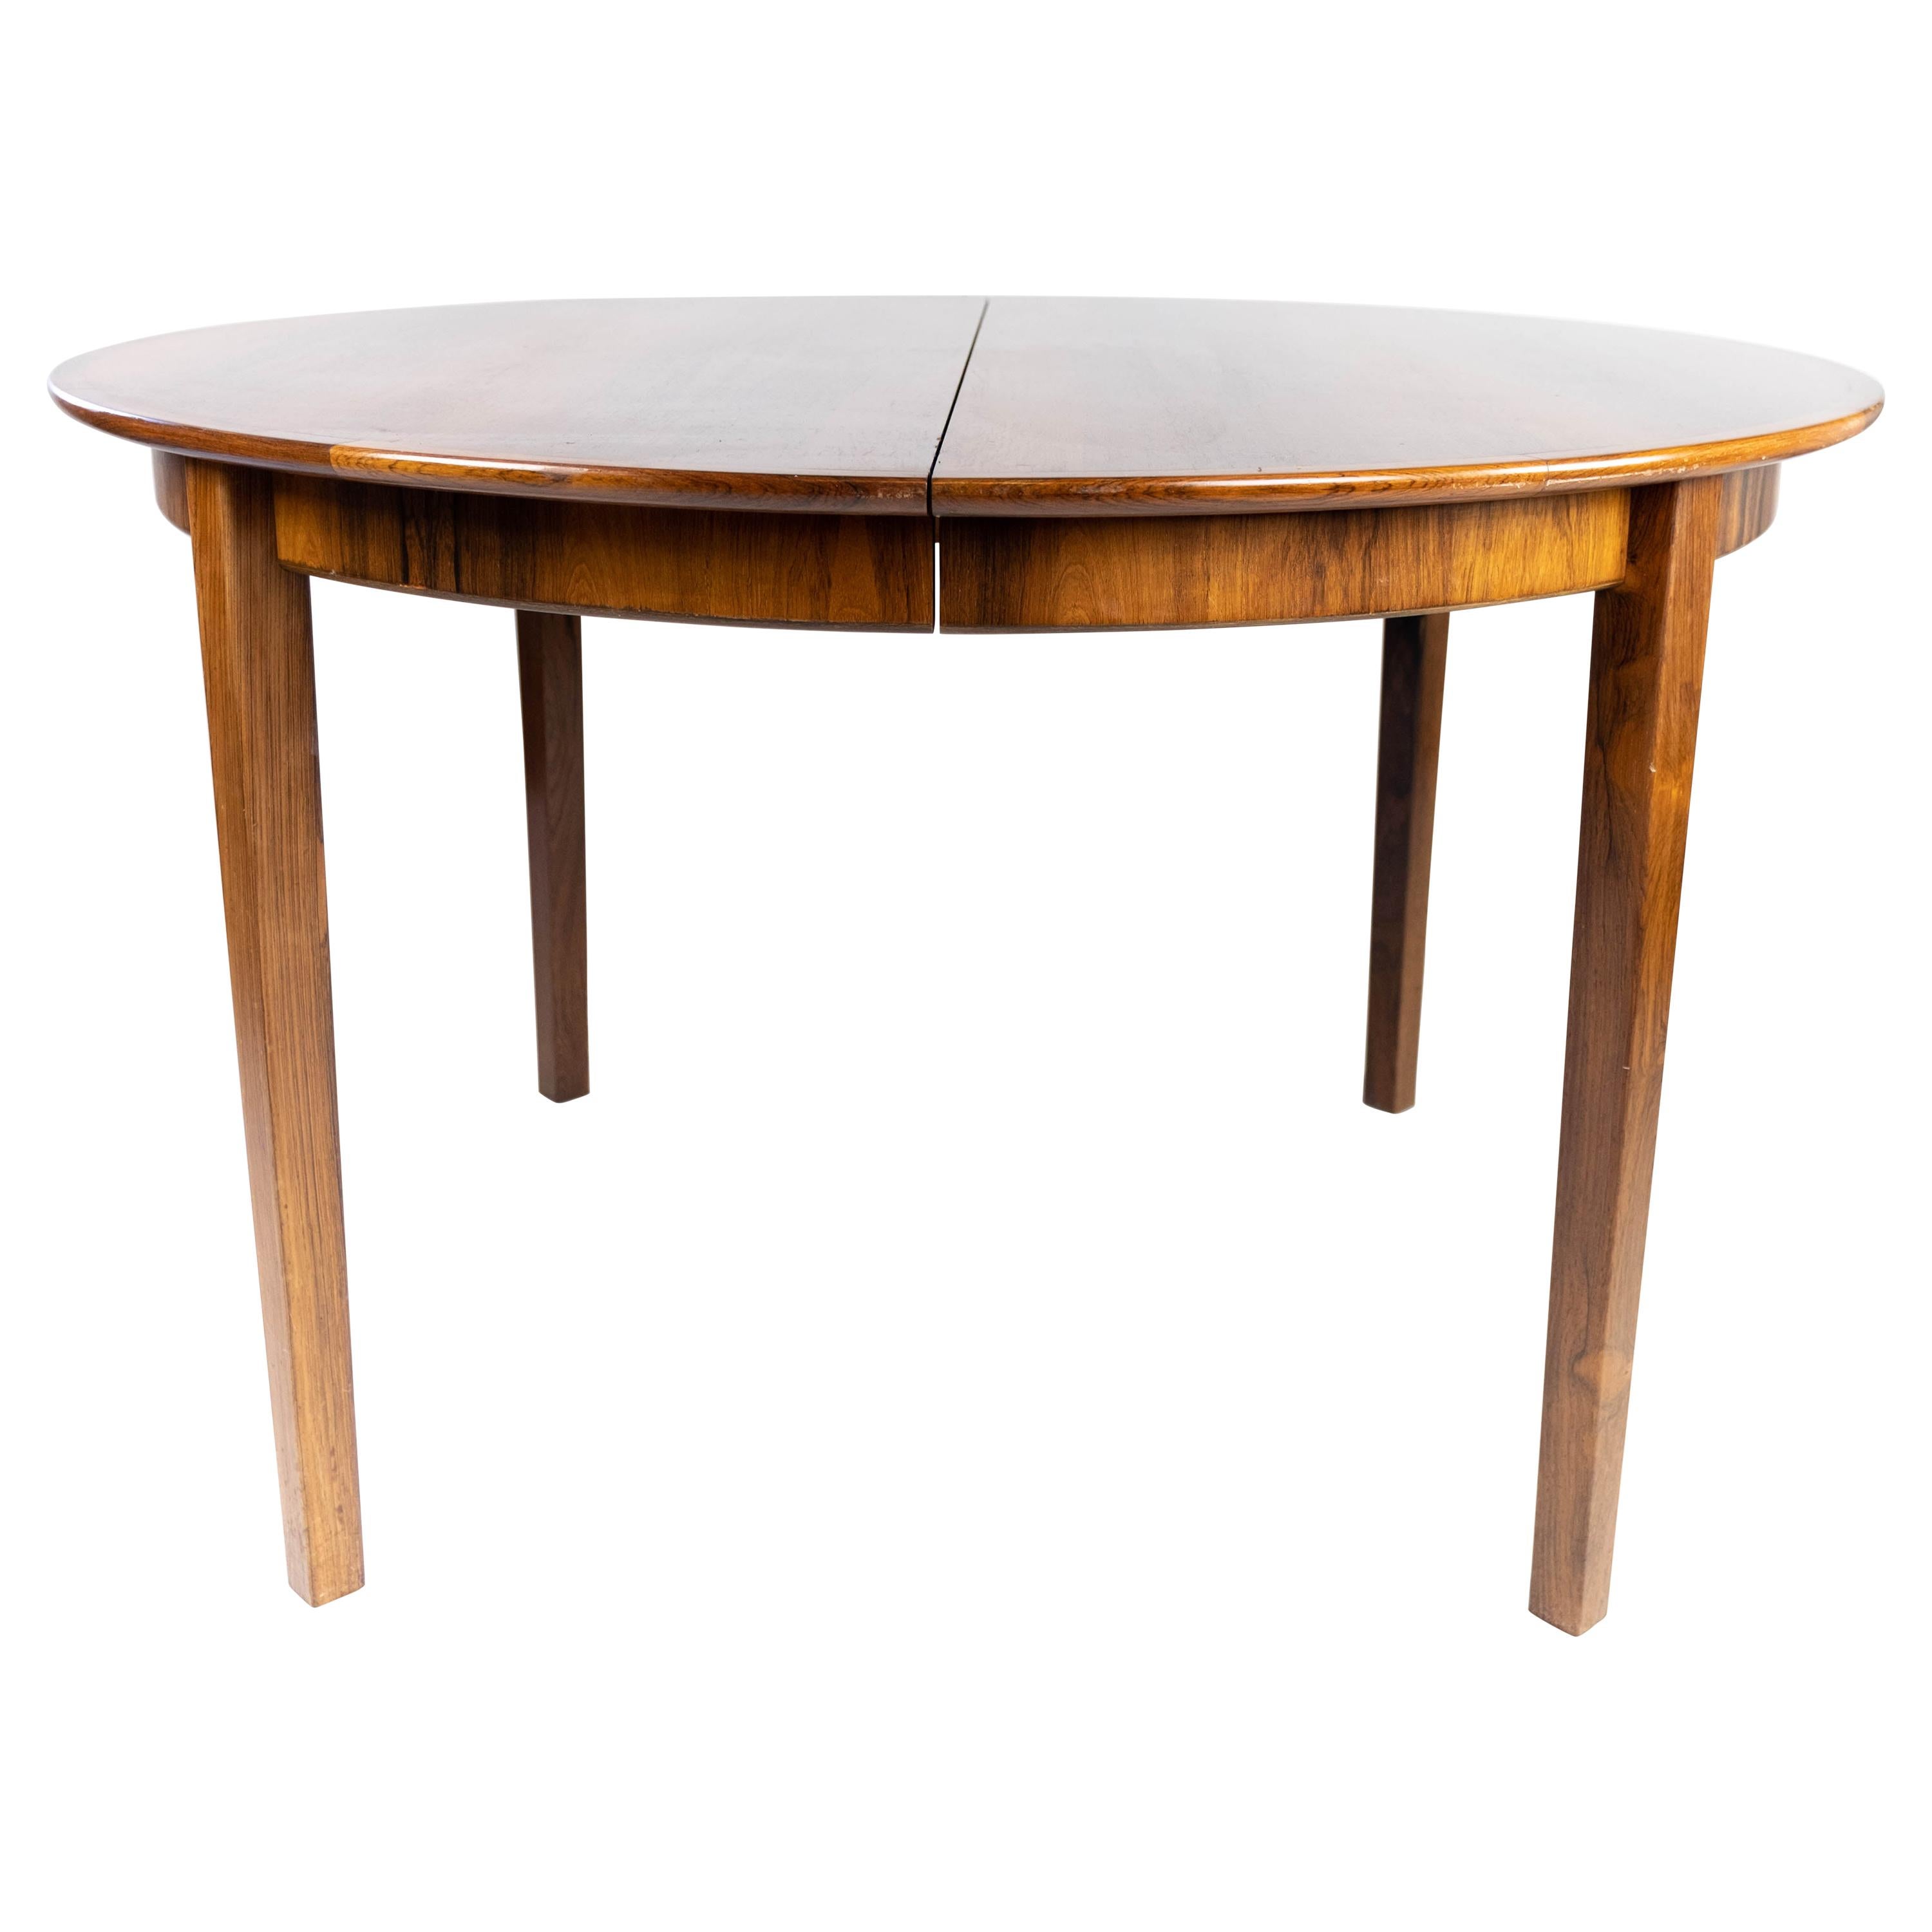 Dining Table Made In Rosewood With Extension Plates, Danish Design From 1960s